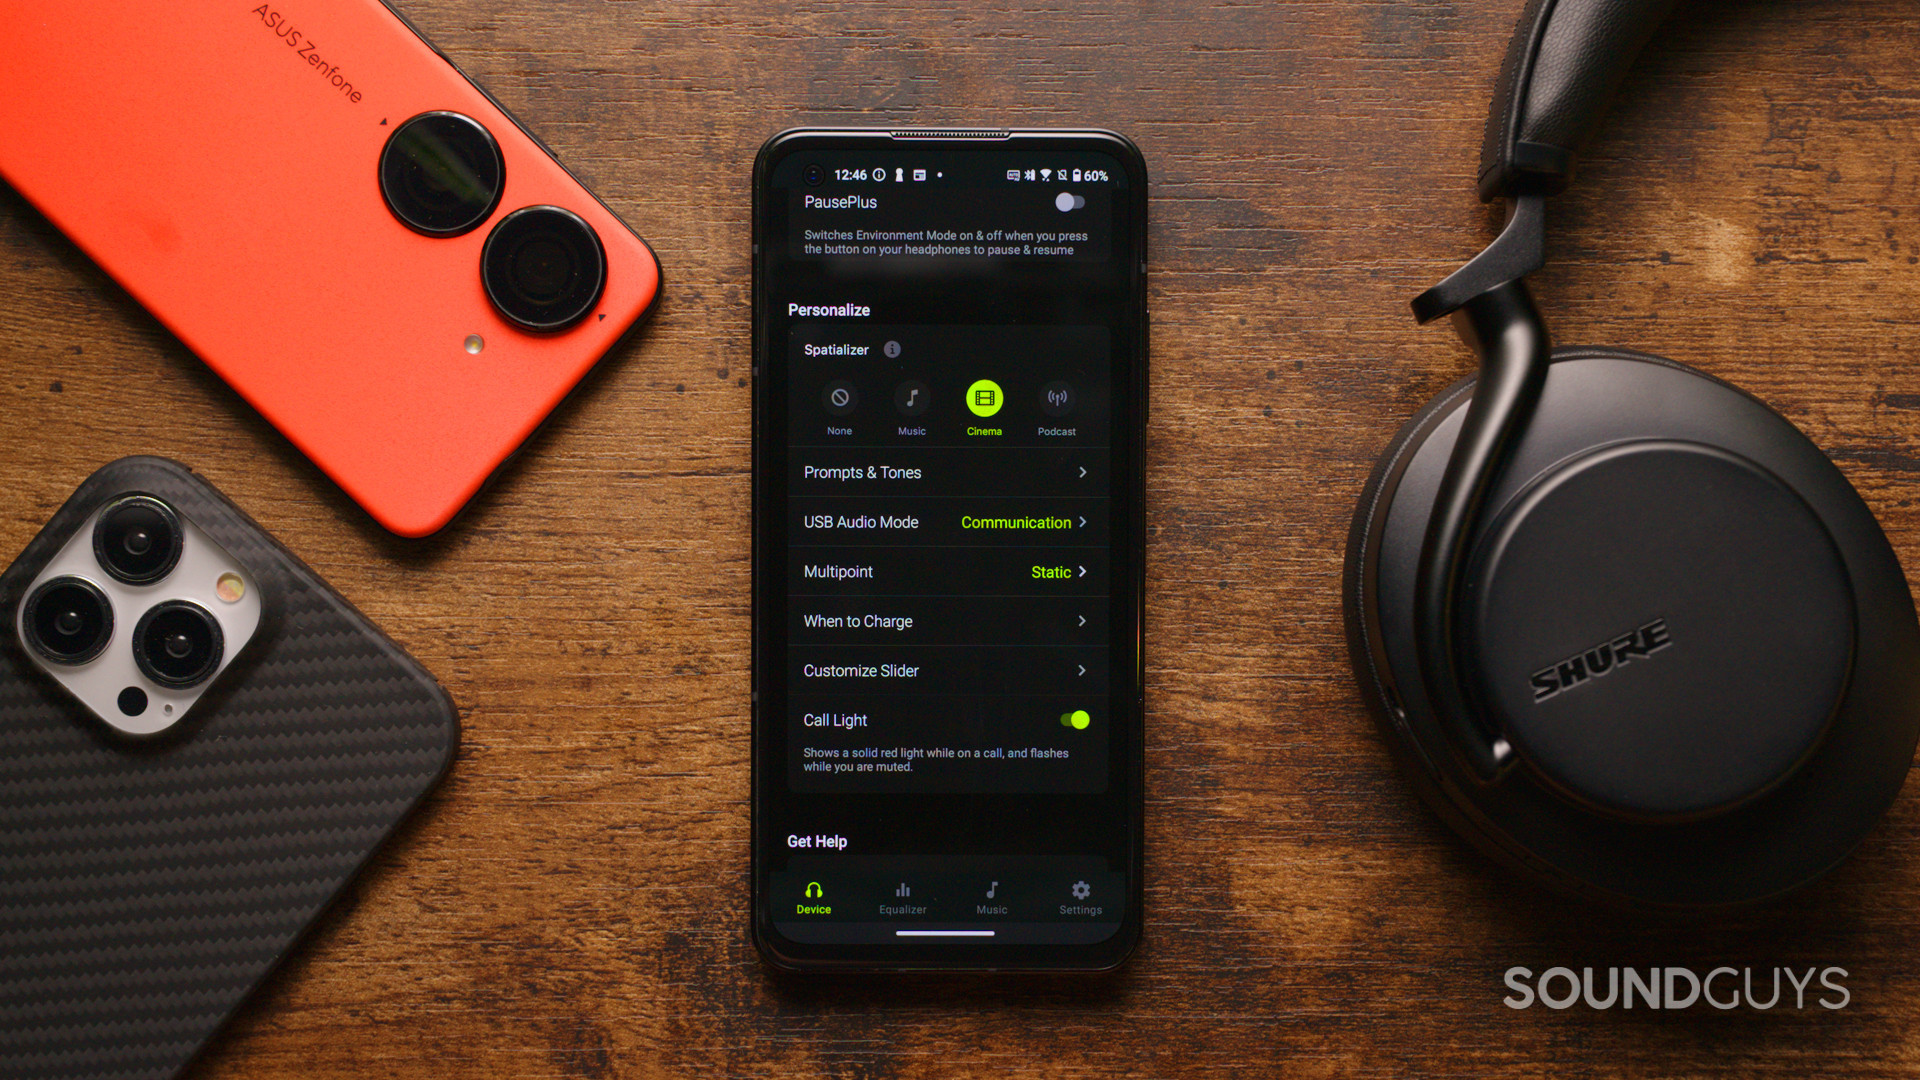 The Shure PLAY app is a semi-essential companion to the Shure AONIC 50 (2nd gen) headphones.